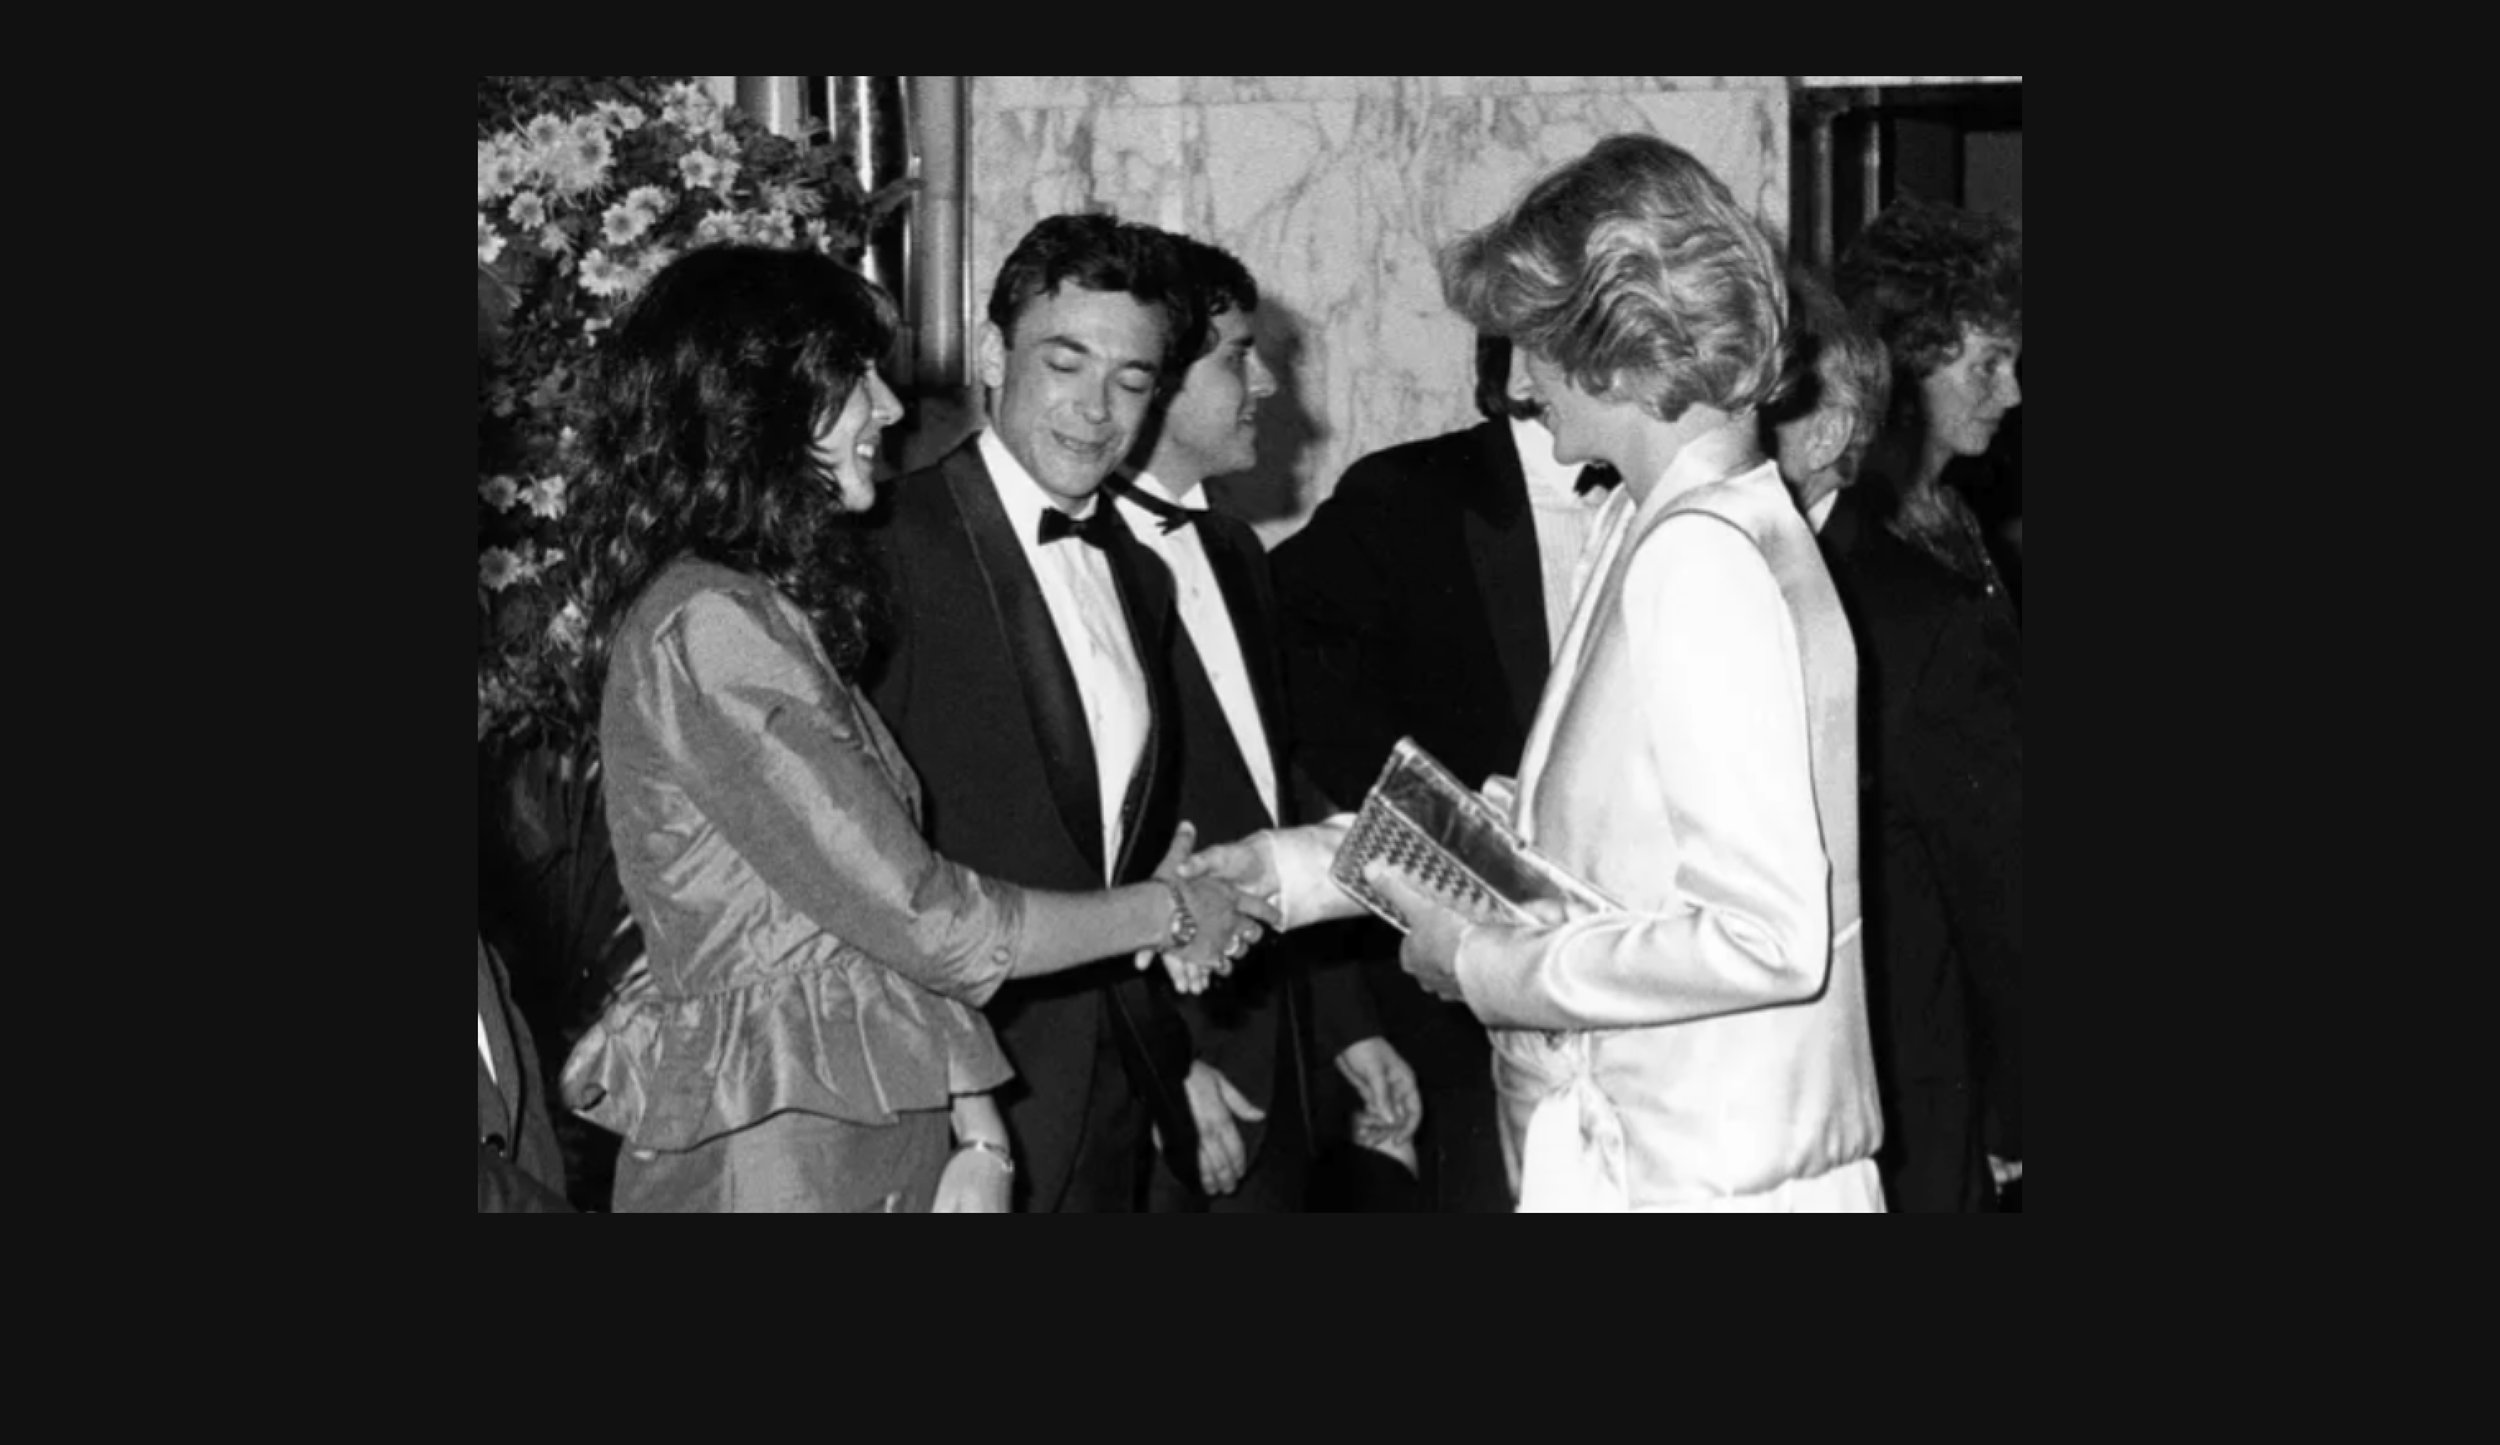  Princess Diana and Ghislaine Maxwell meeting at the premiere of Indiana Jones and the Temple of Doom, 1984 